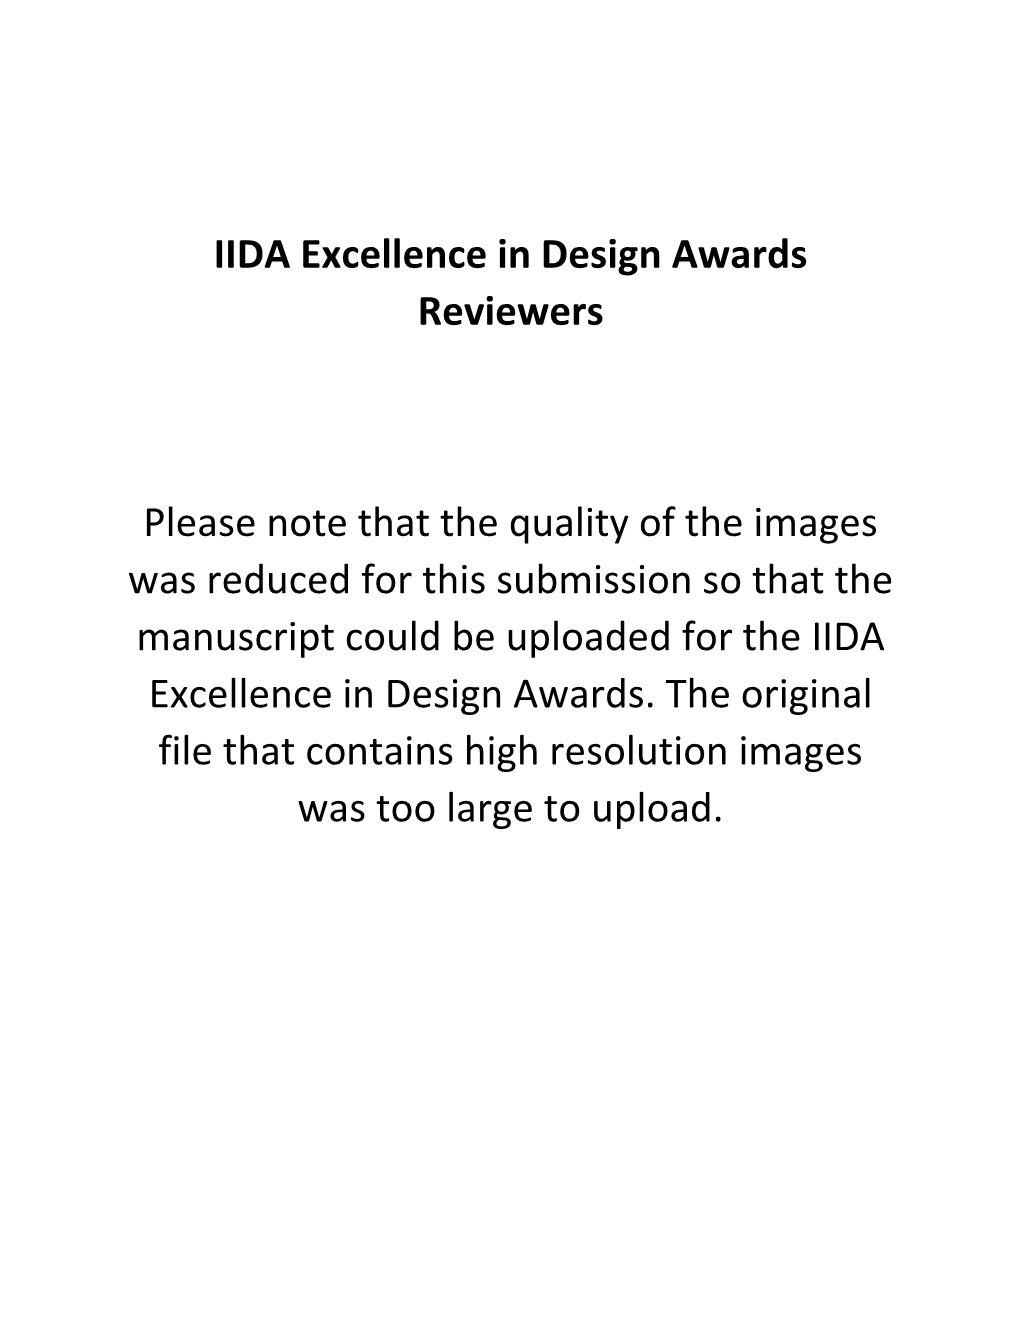 IIDA Excellence in Design Awards Reviewers Please Note That The